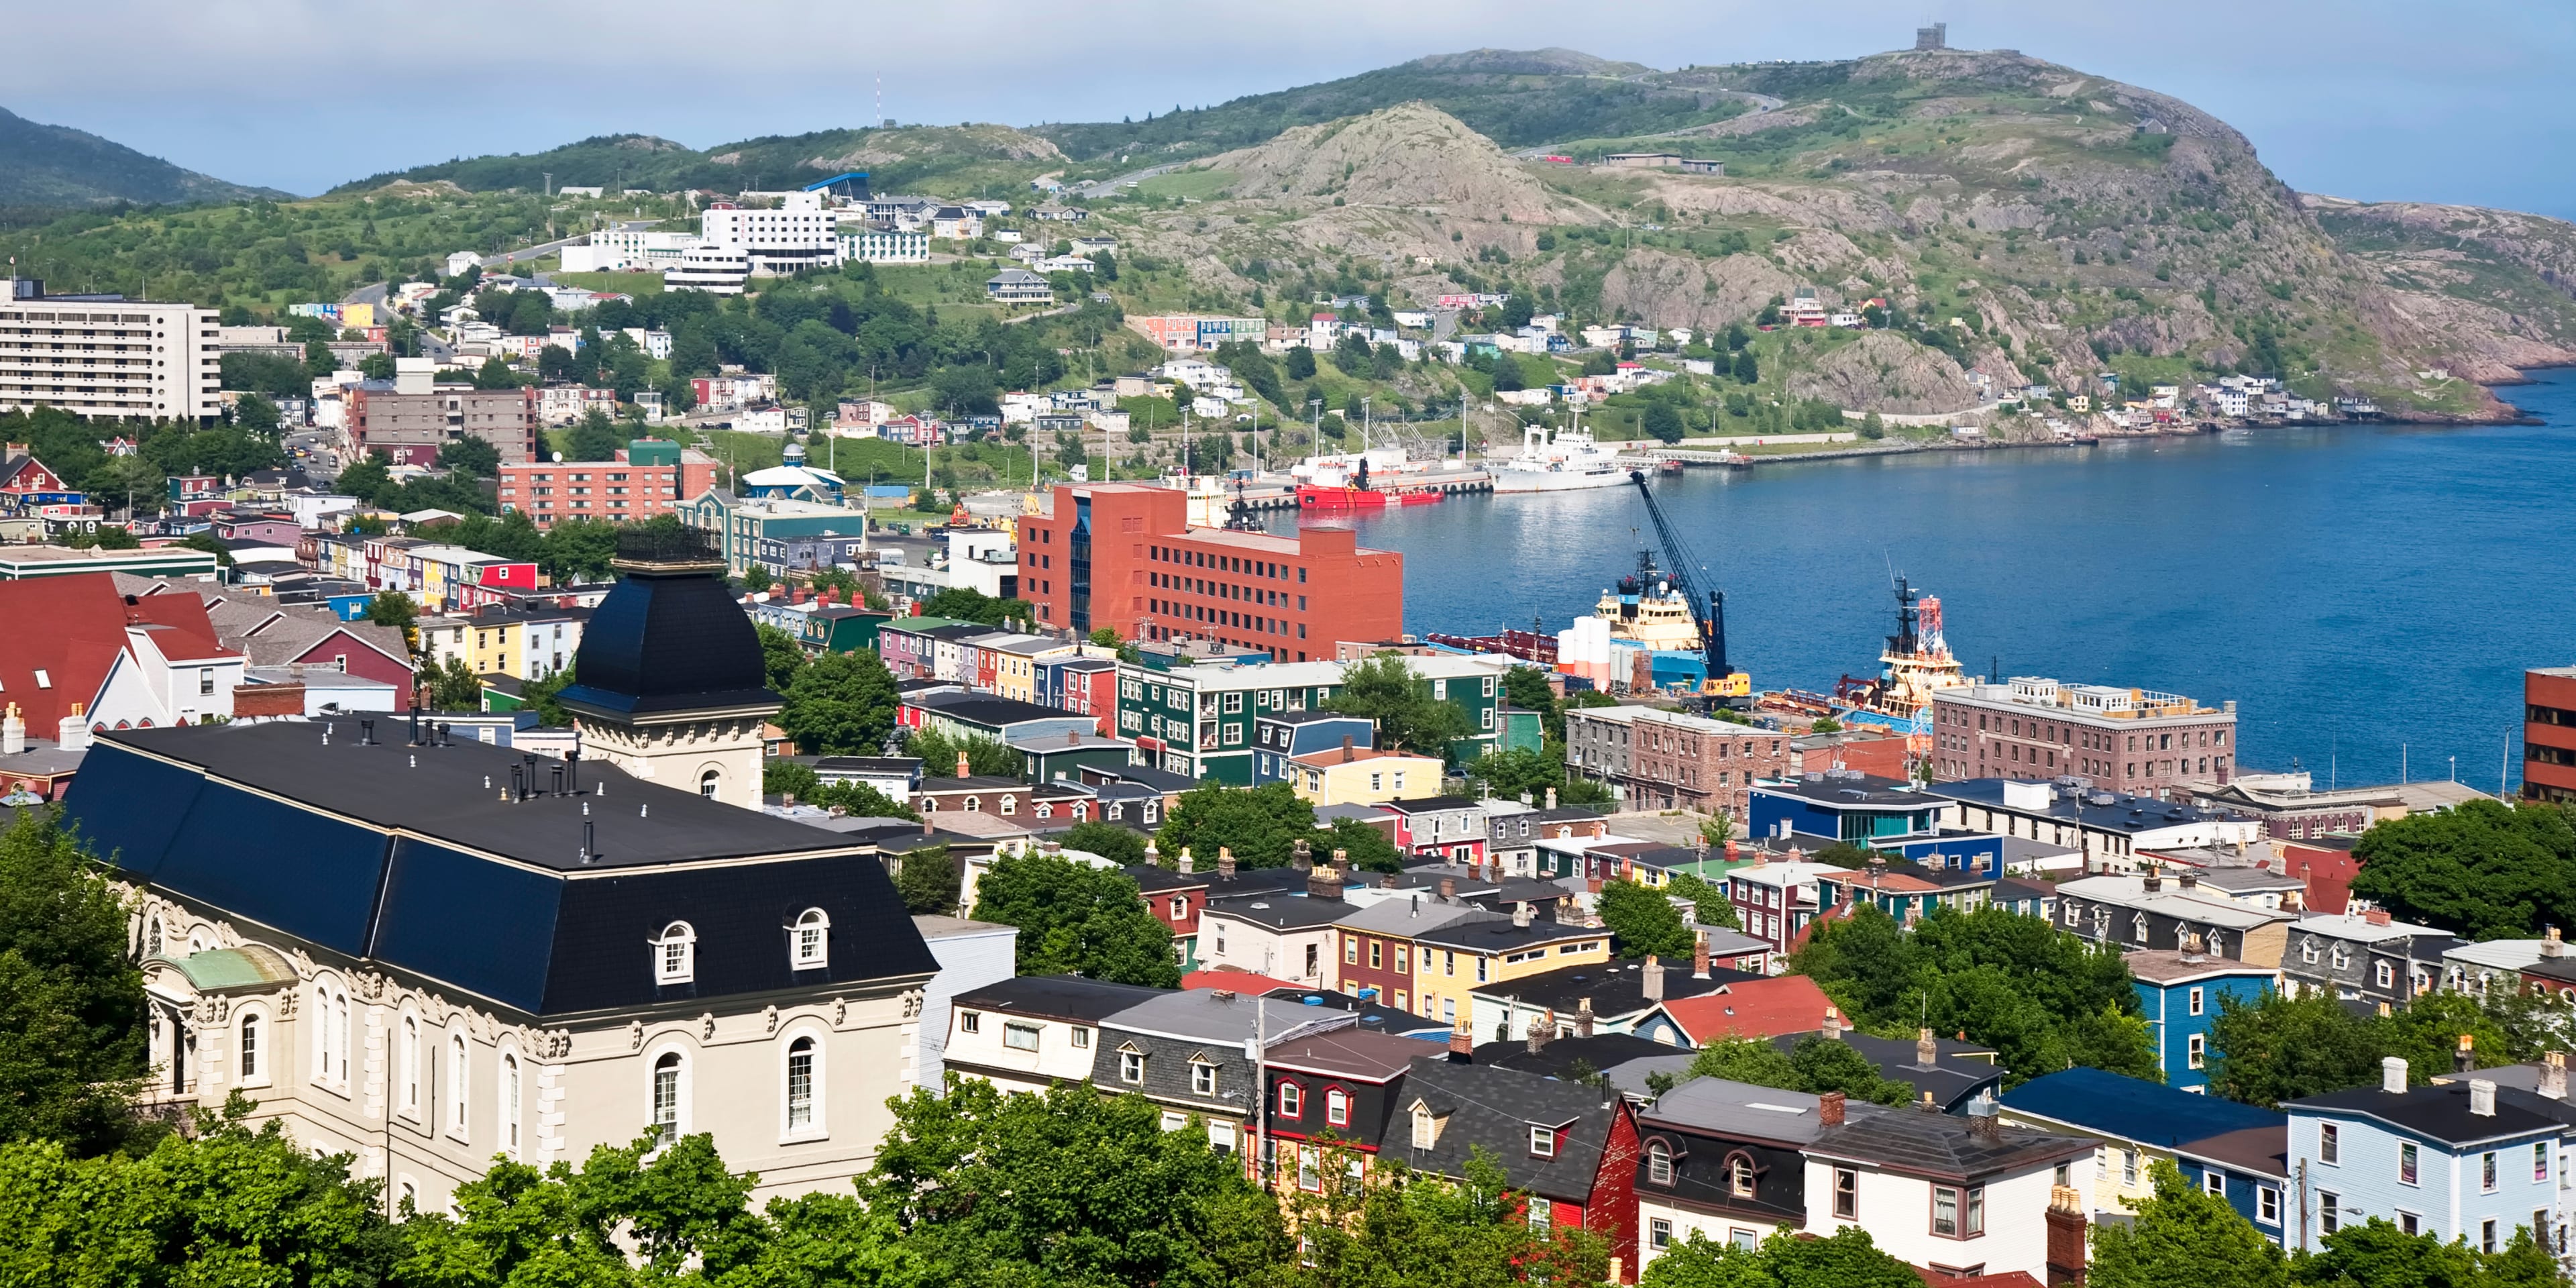 Costal town overlooking the water in St. Johns, Newfoundland